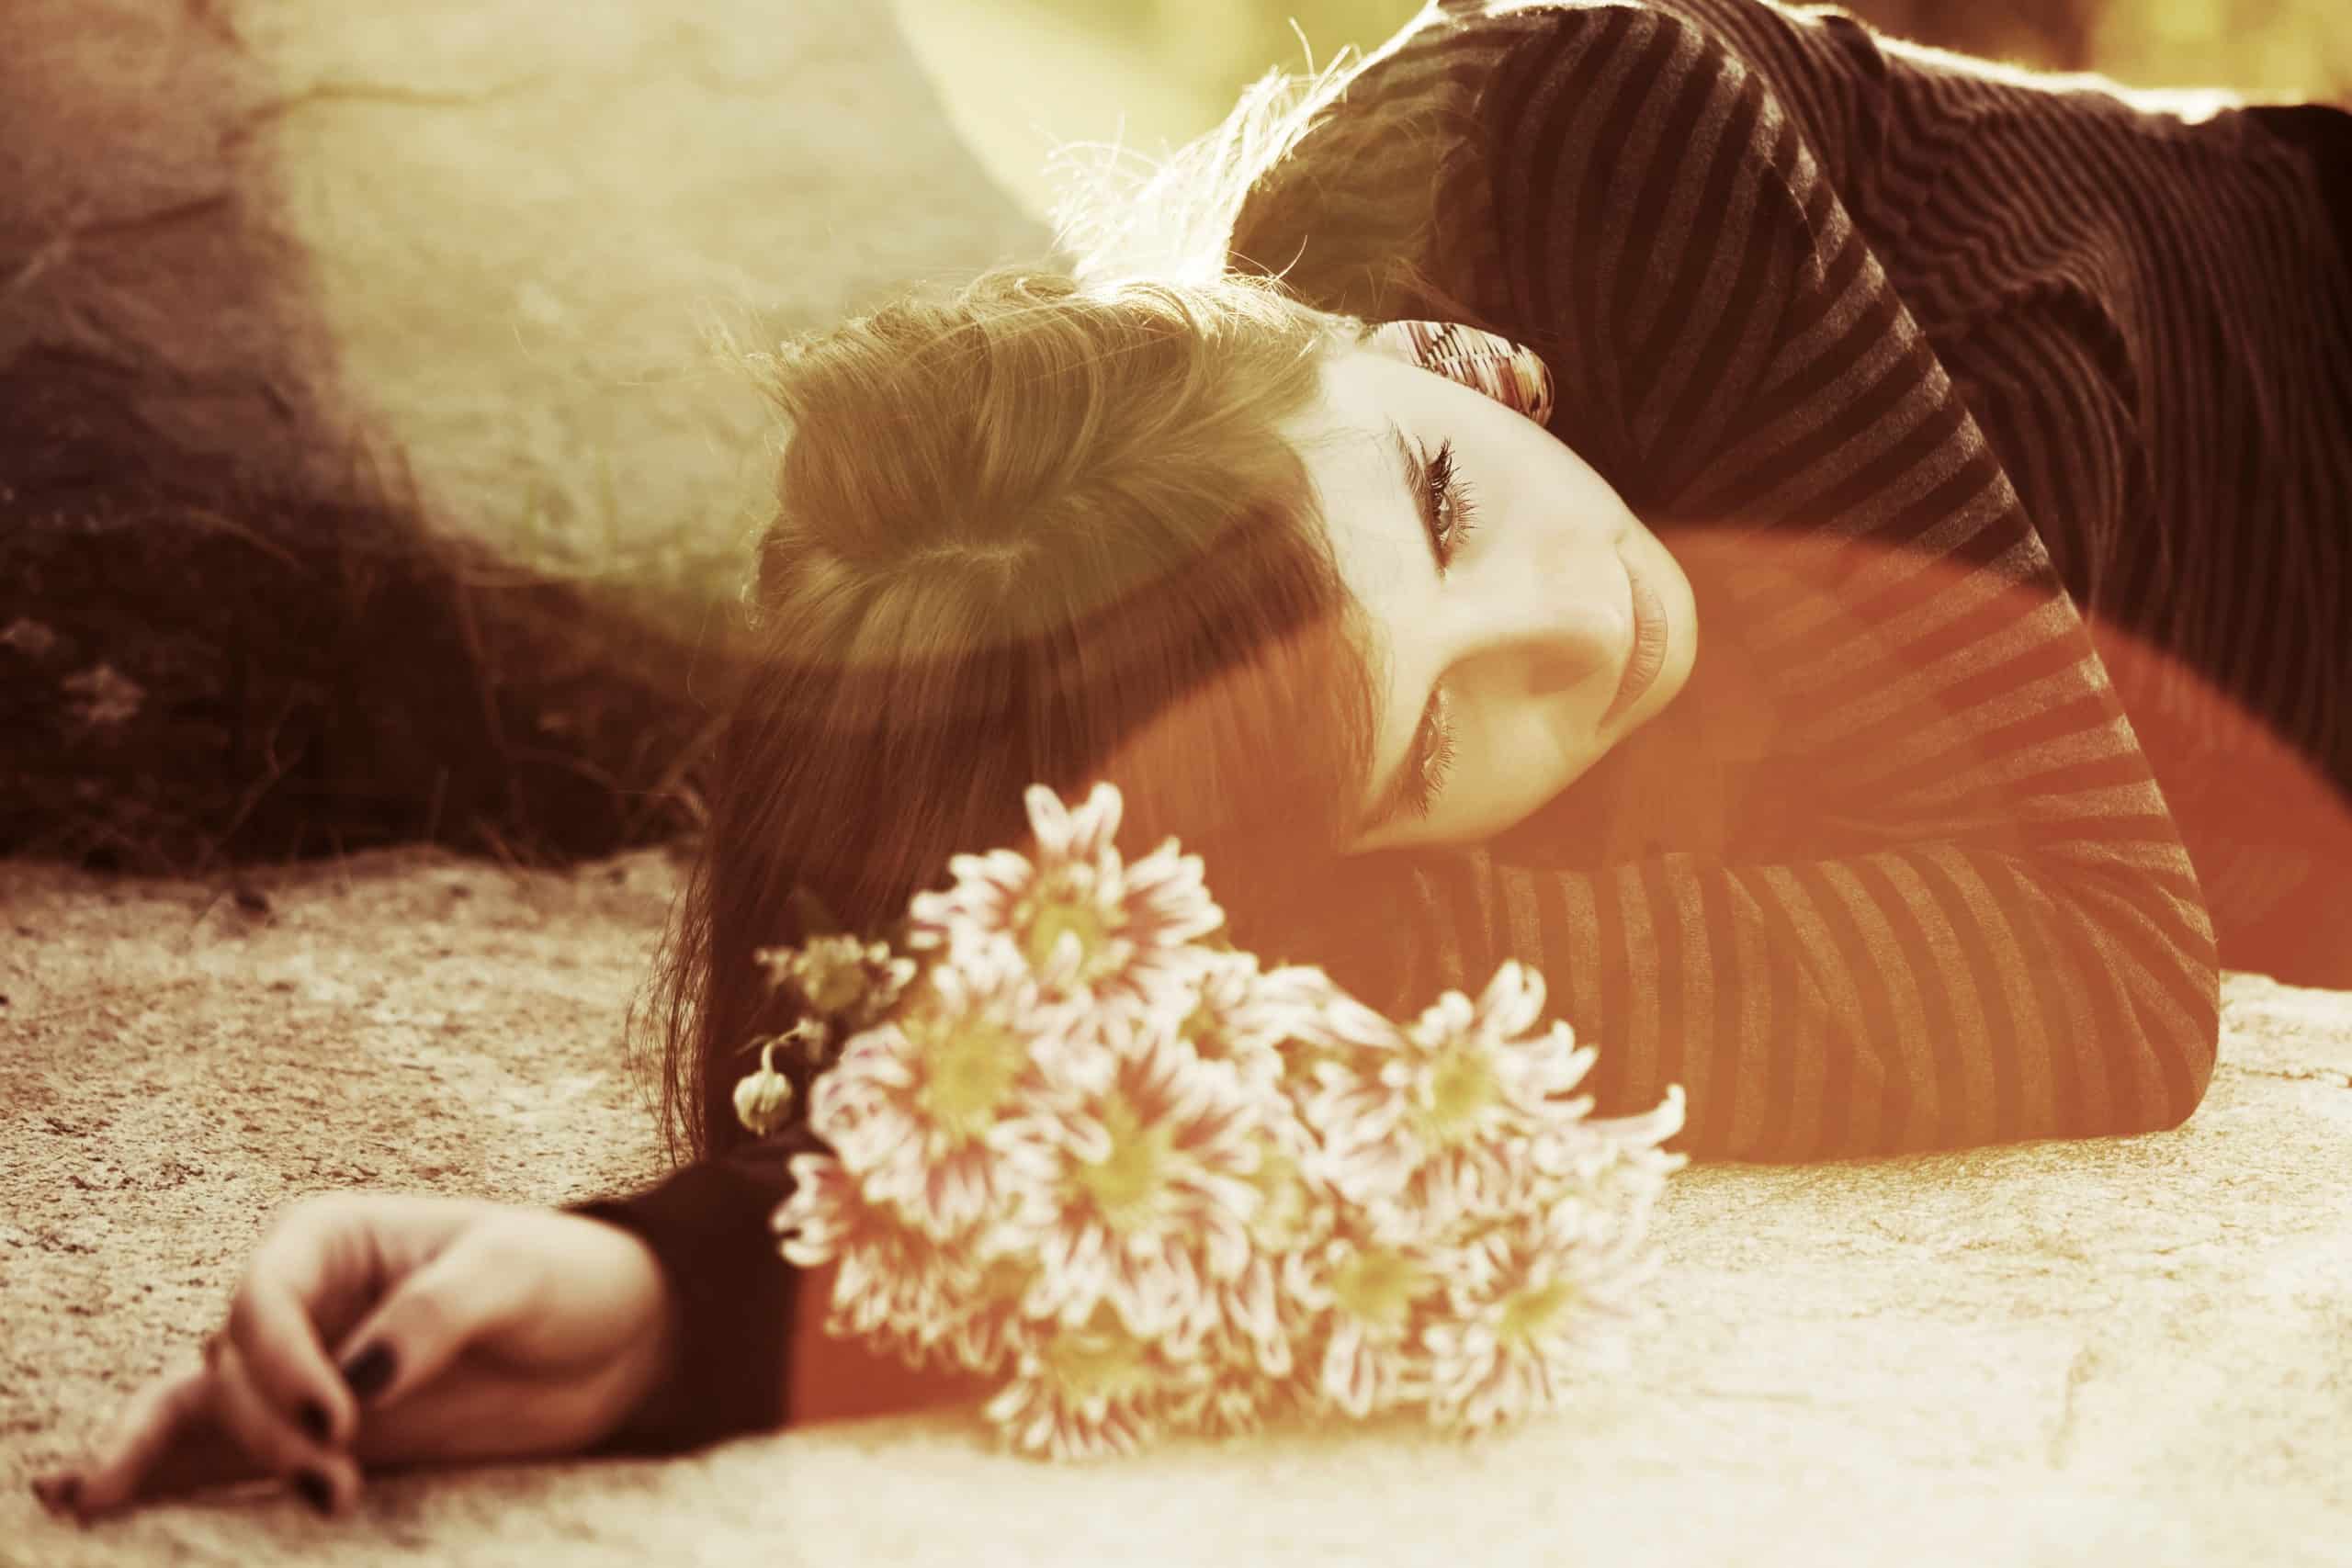 Sad young woman lying on the ground, white flowers above her head.